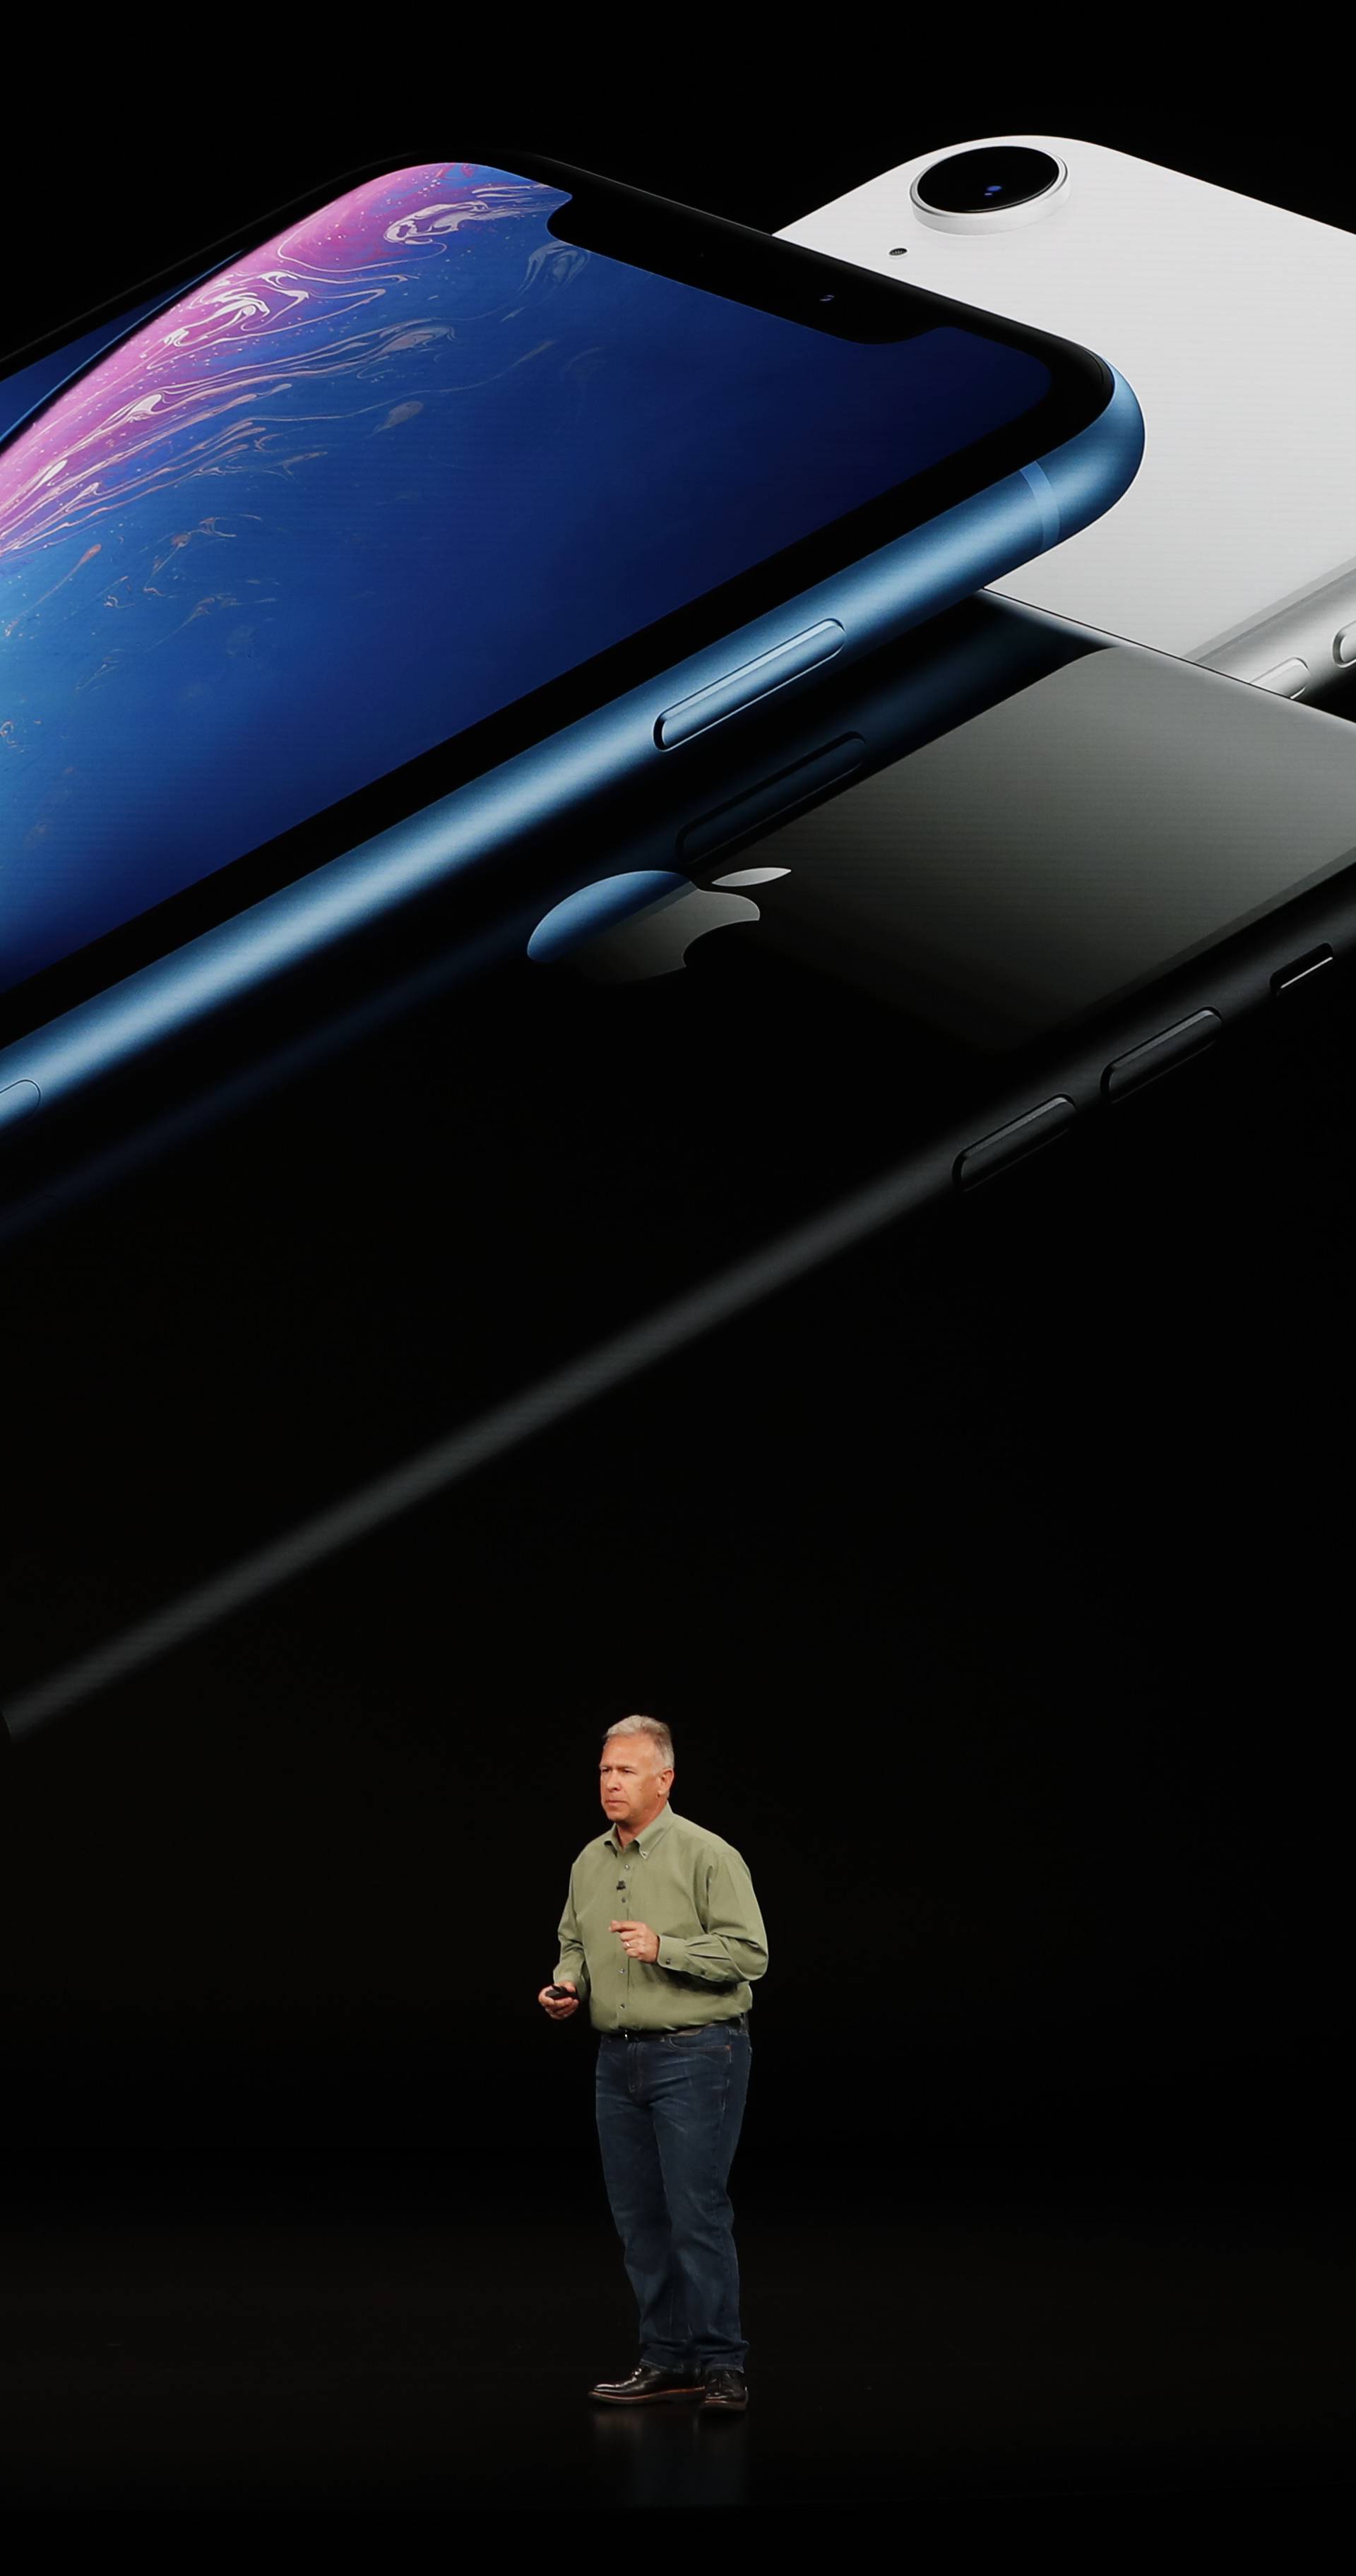 Schiller Senior Vice President, Worldwide Marketing of Apple, speaks about the the new Apple iPhone XR at an Apple Inc product launch in Cupertino